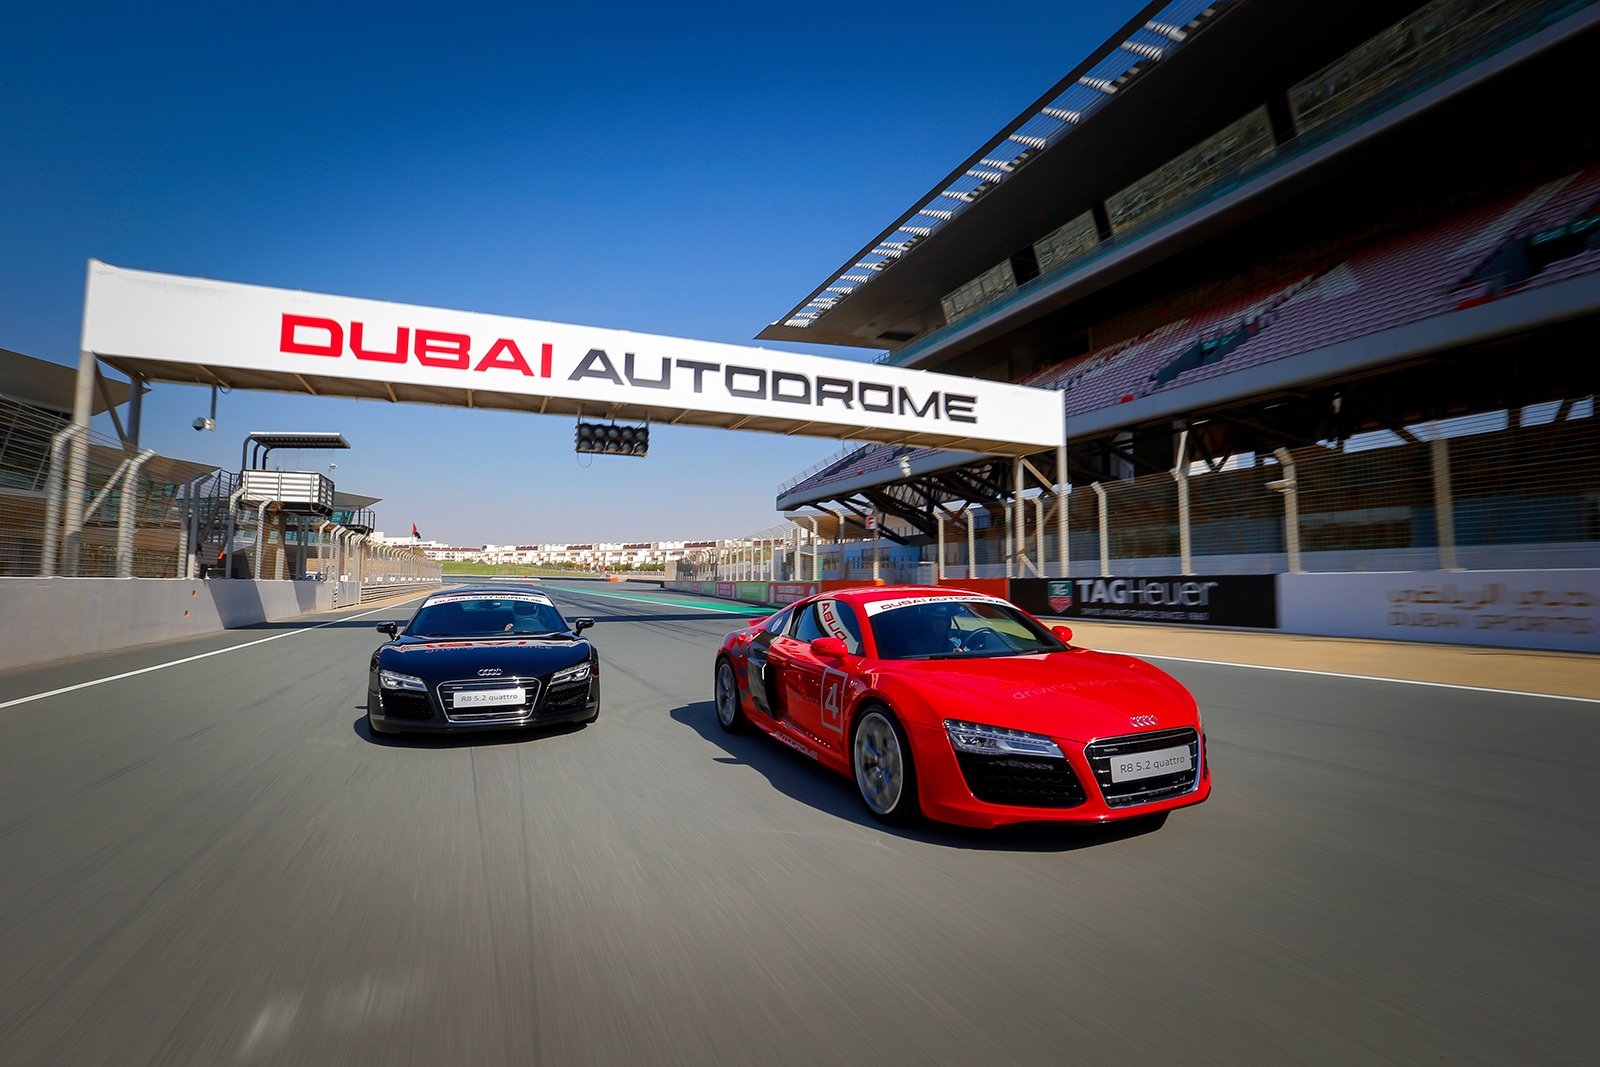 How to drive Audi R8 on a racing track in Dubai